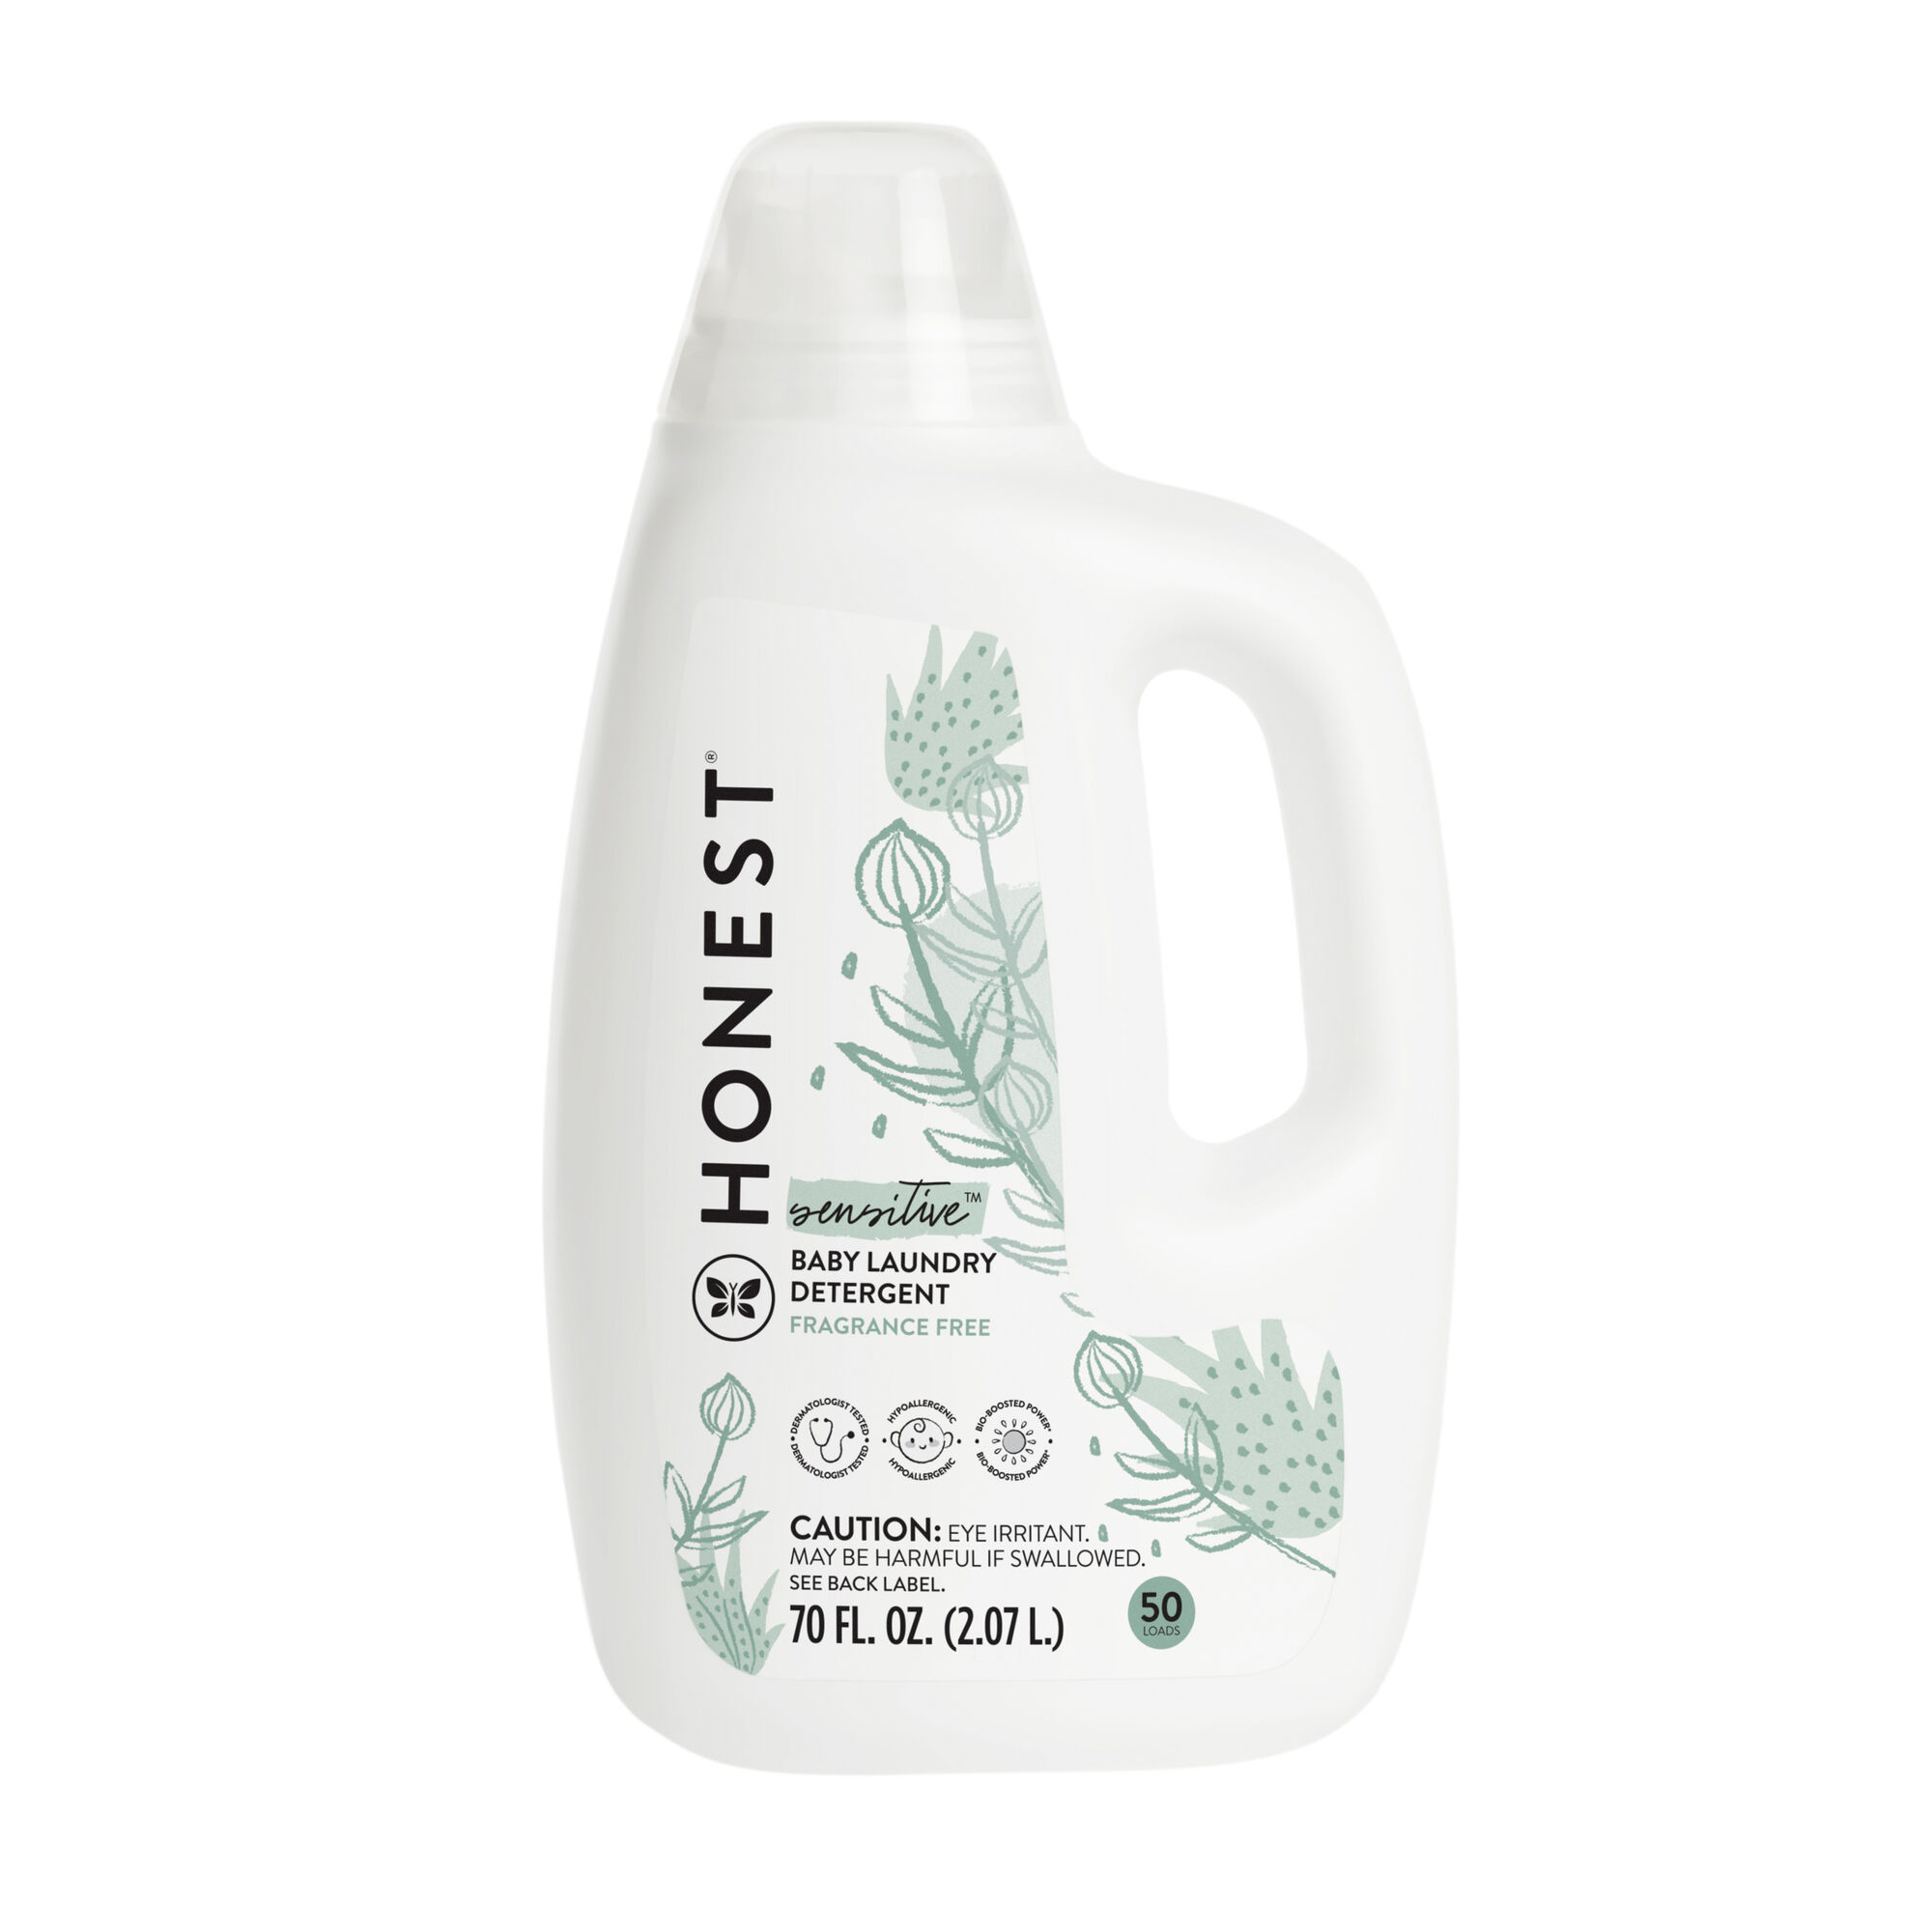 The Honest Company Honest Baby Stain Remover 26 Oz., Stain Removers, Household